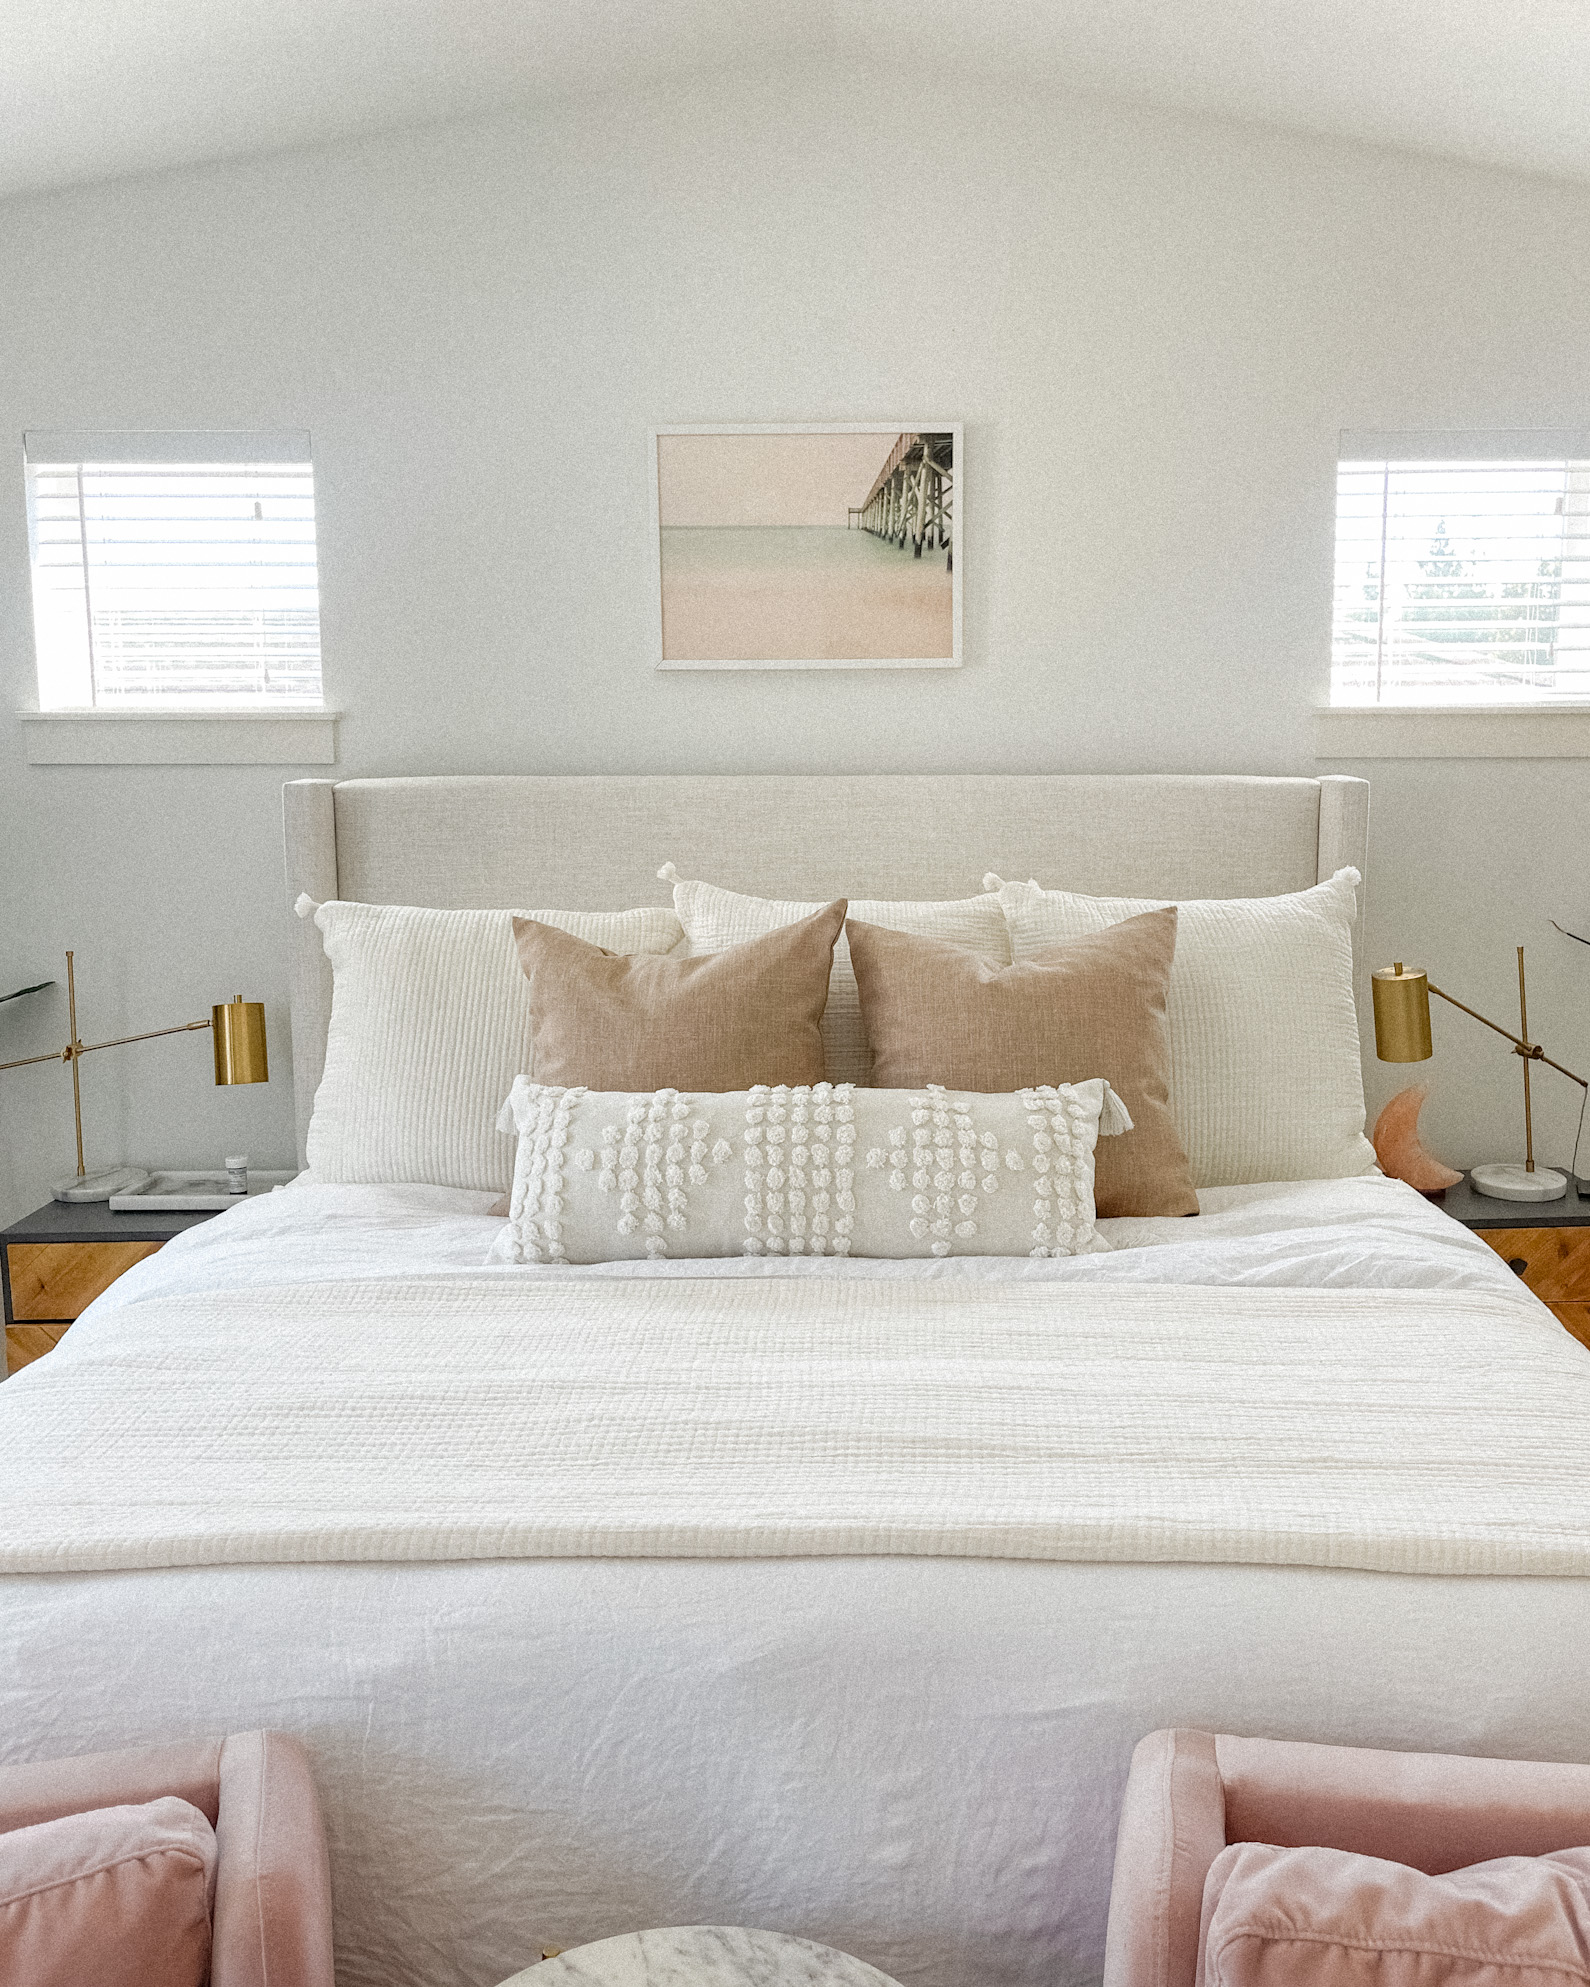 How To Arrange Pillows On A King Bed, How To Arrange Pillows On A King Bed